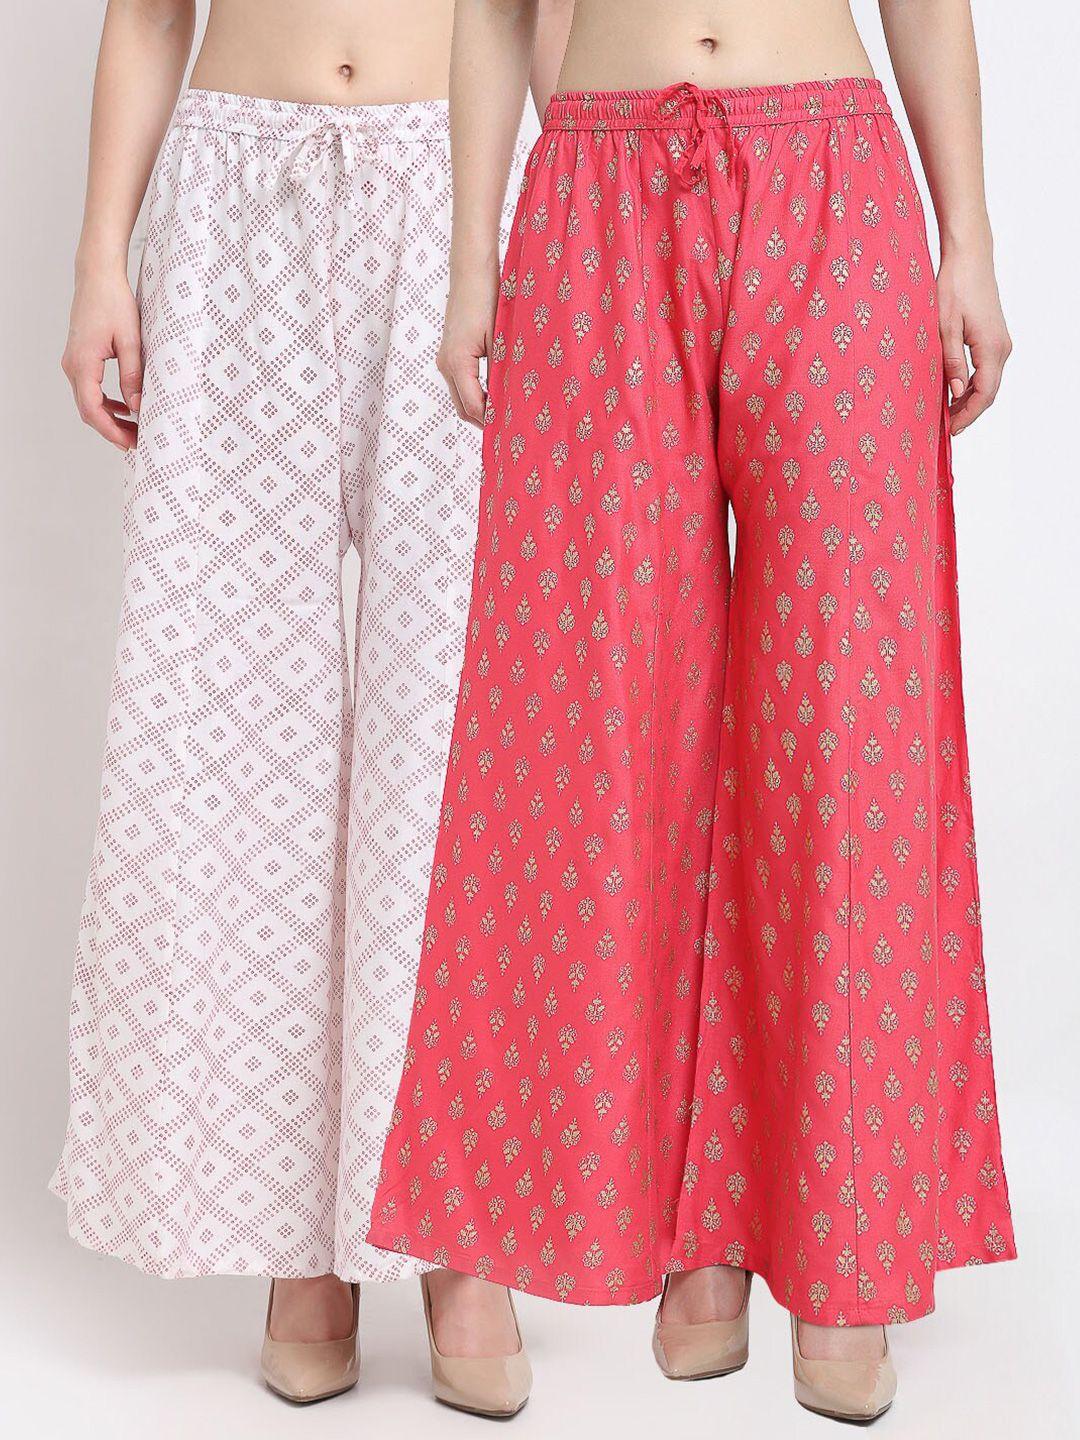 gracit women pack of 2 white & pink ethnic motifs printed knitted ethnic palazzos